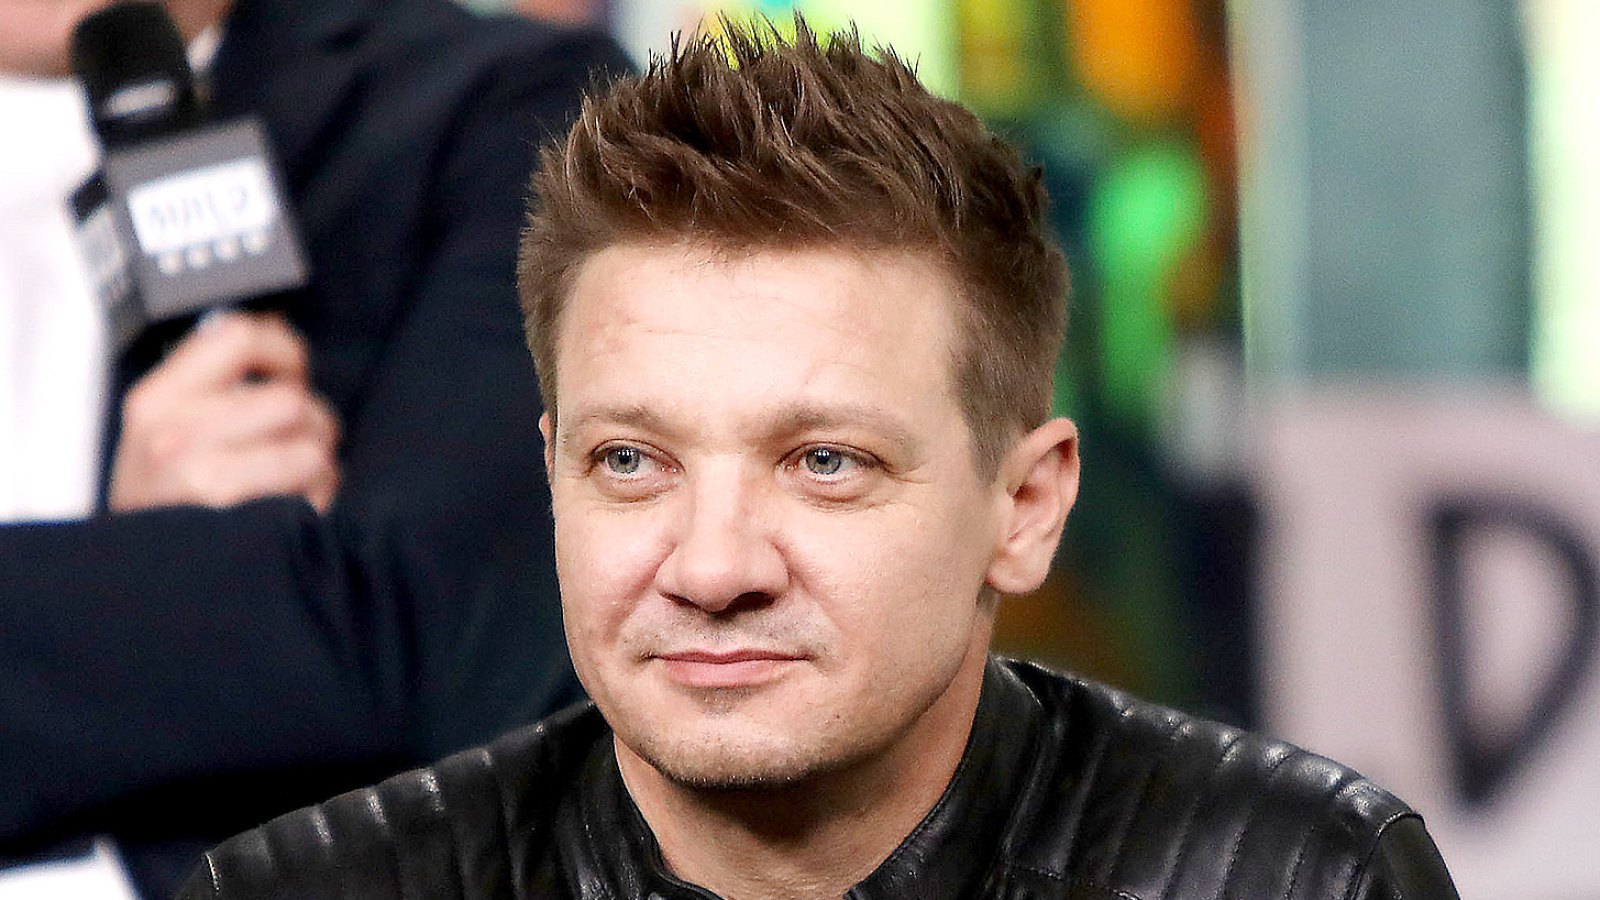 Jeremy Renner Requests to Lower Child Support Payments Due to Coronavirus Pandemic